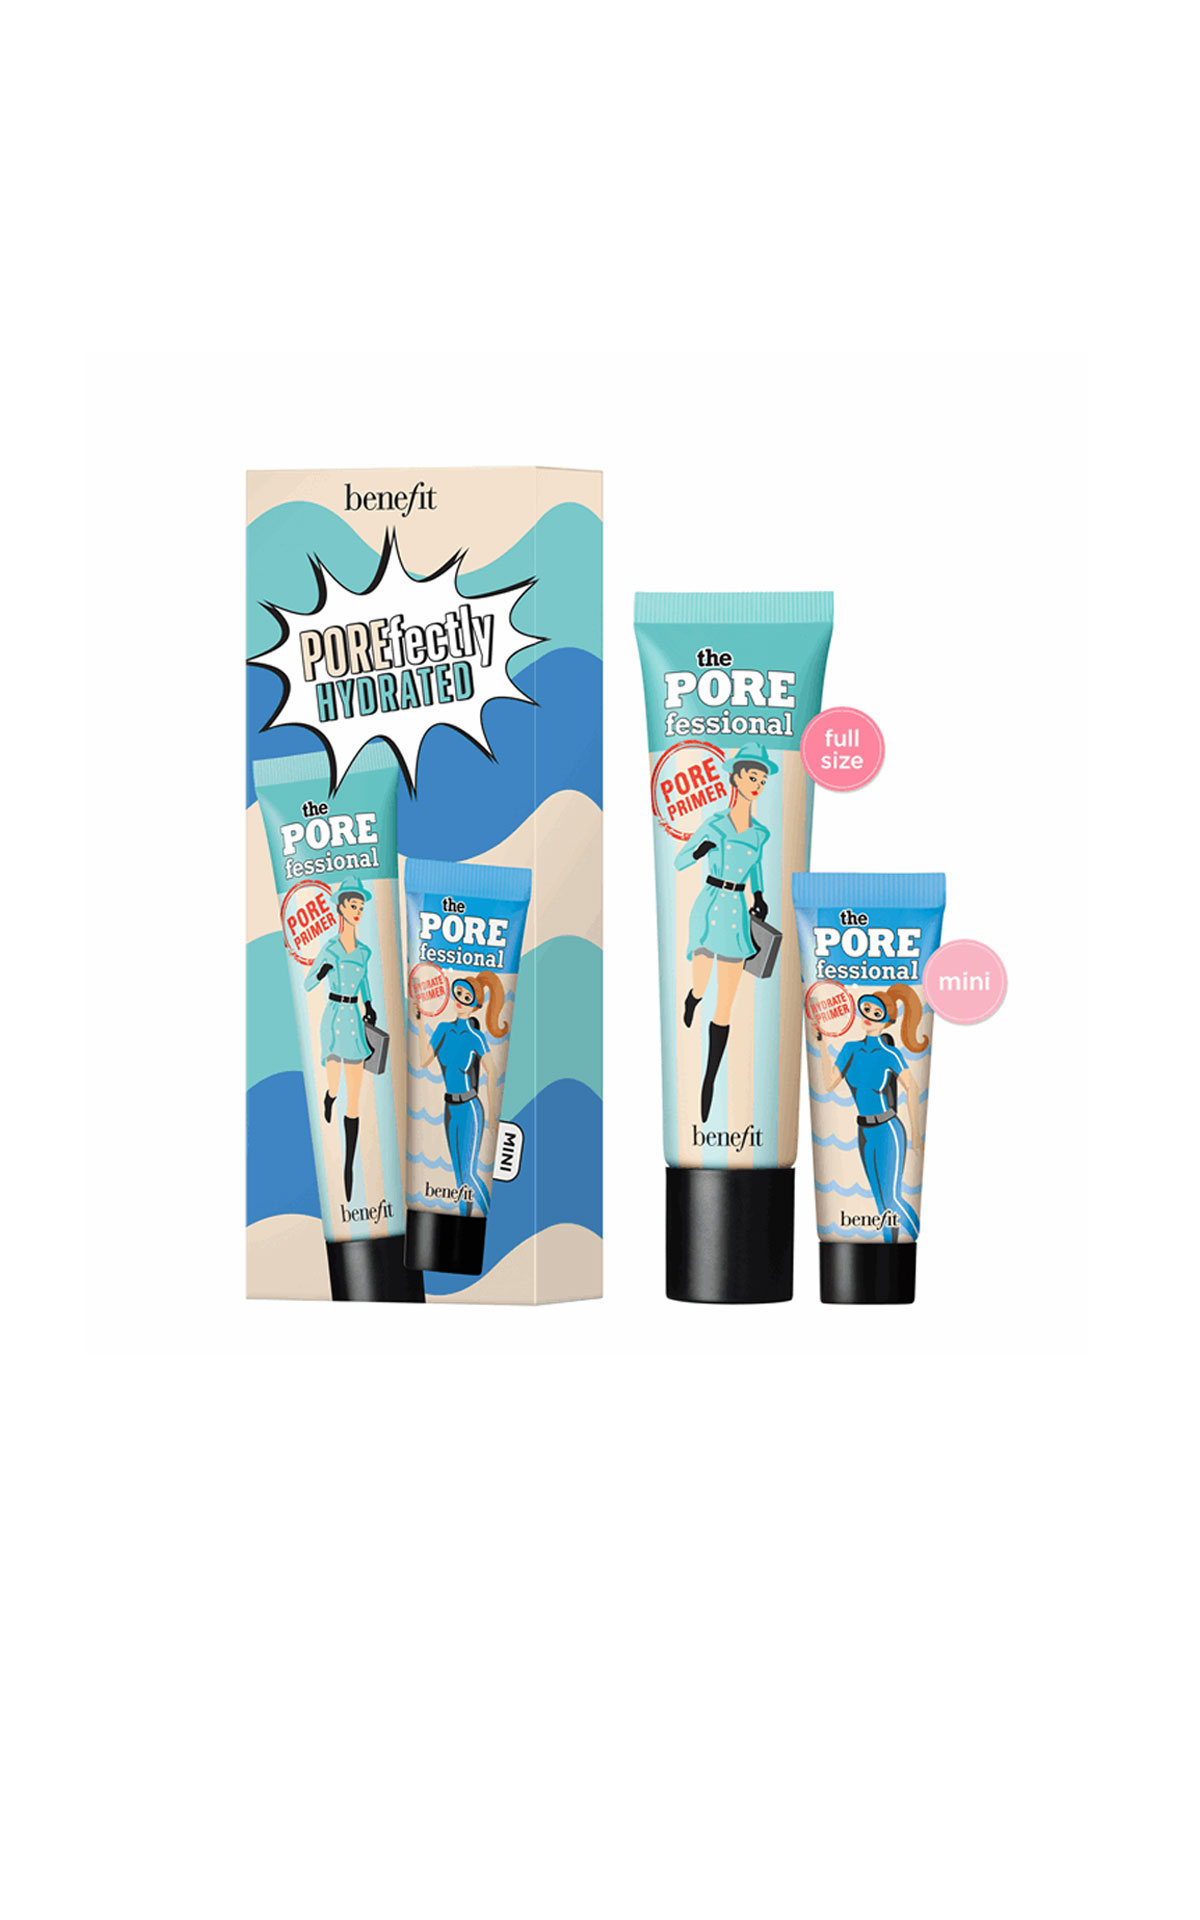 Benefit Cosmetics Porfectly hydrated set from Bicester Village